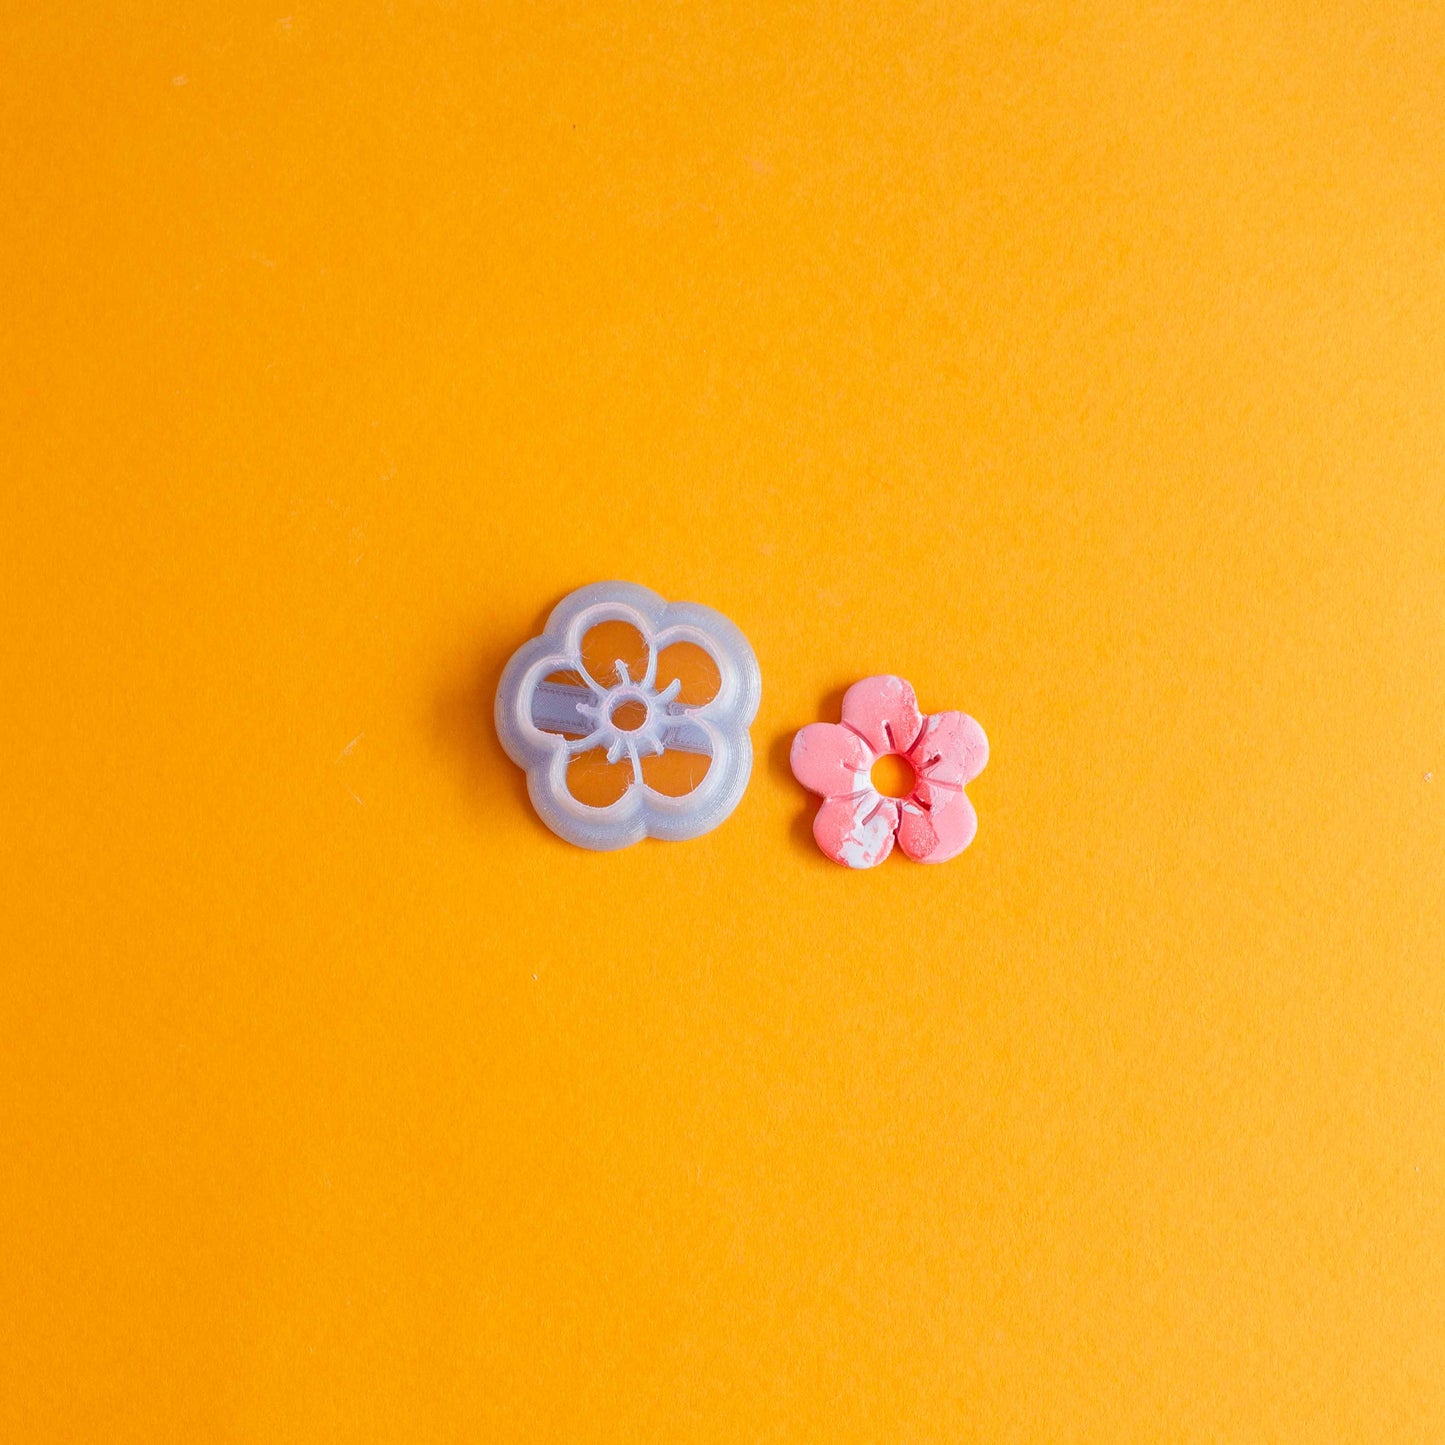 Small flower shaped cutter and pink and white polymer clay daisy